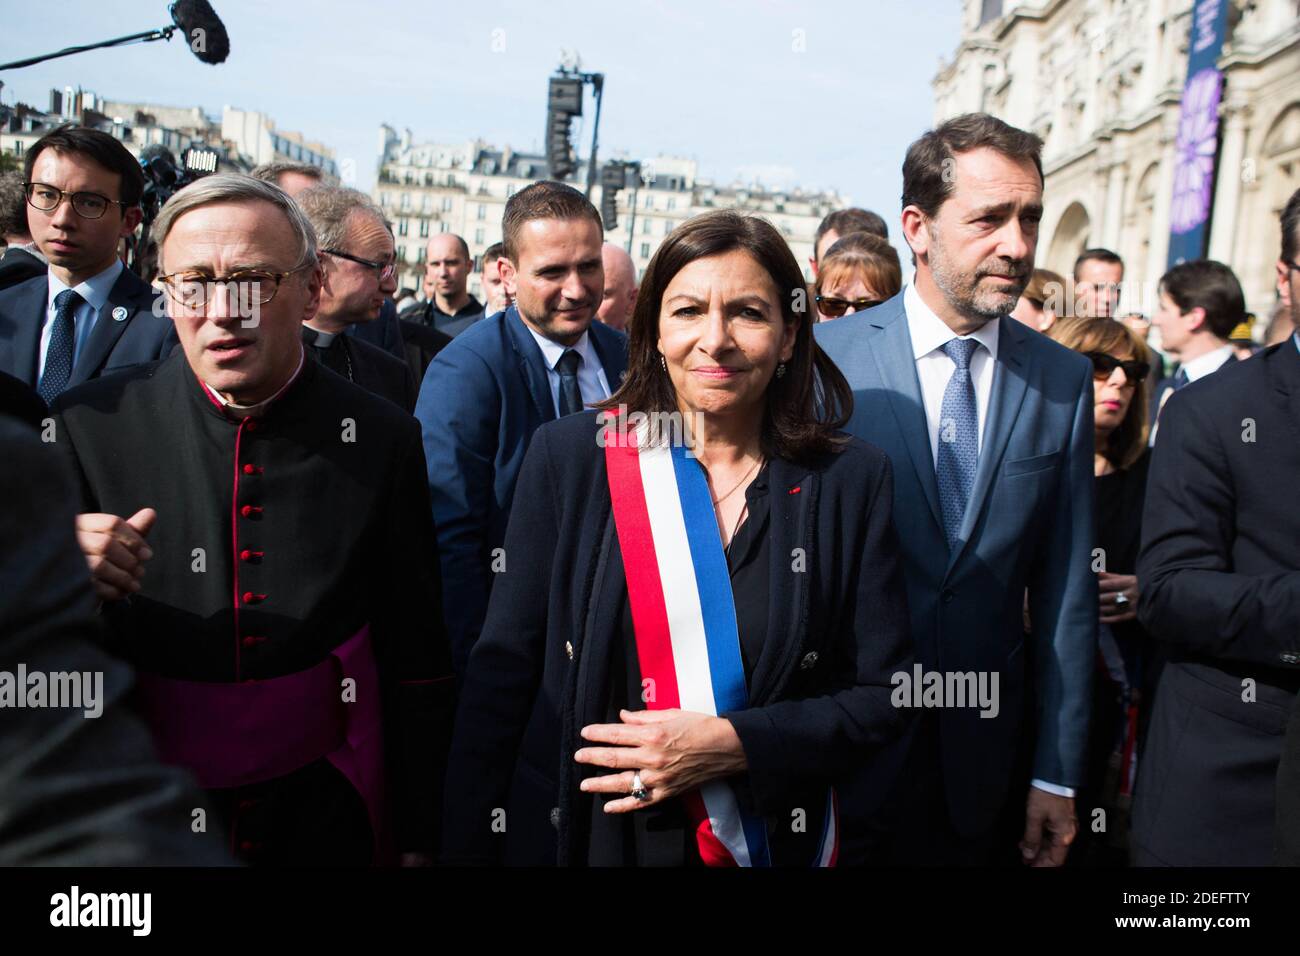 Jean-Marc Chauve, French Interior Minister Christophe Castaner, Paris prefect Didier Lallement, Paris mayor Anne Hidalgo, and other officials walk by Notre Dame cathedral on April 18, 2019 in Paris. France paid a daylong tribute on April 18, 2019 to the Paris firefighters who saved Notre Dame Cathedral from collapse, while construction workers rushed to secure an area above one of the church's famed rose-shaped windows and other vulnerable sections of the fire-damaged landmark. Photo by Raphael Lafargue/ABACAPRESS.COM Stock Photo